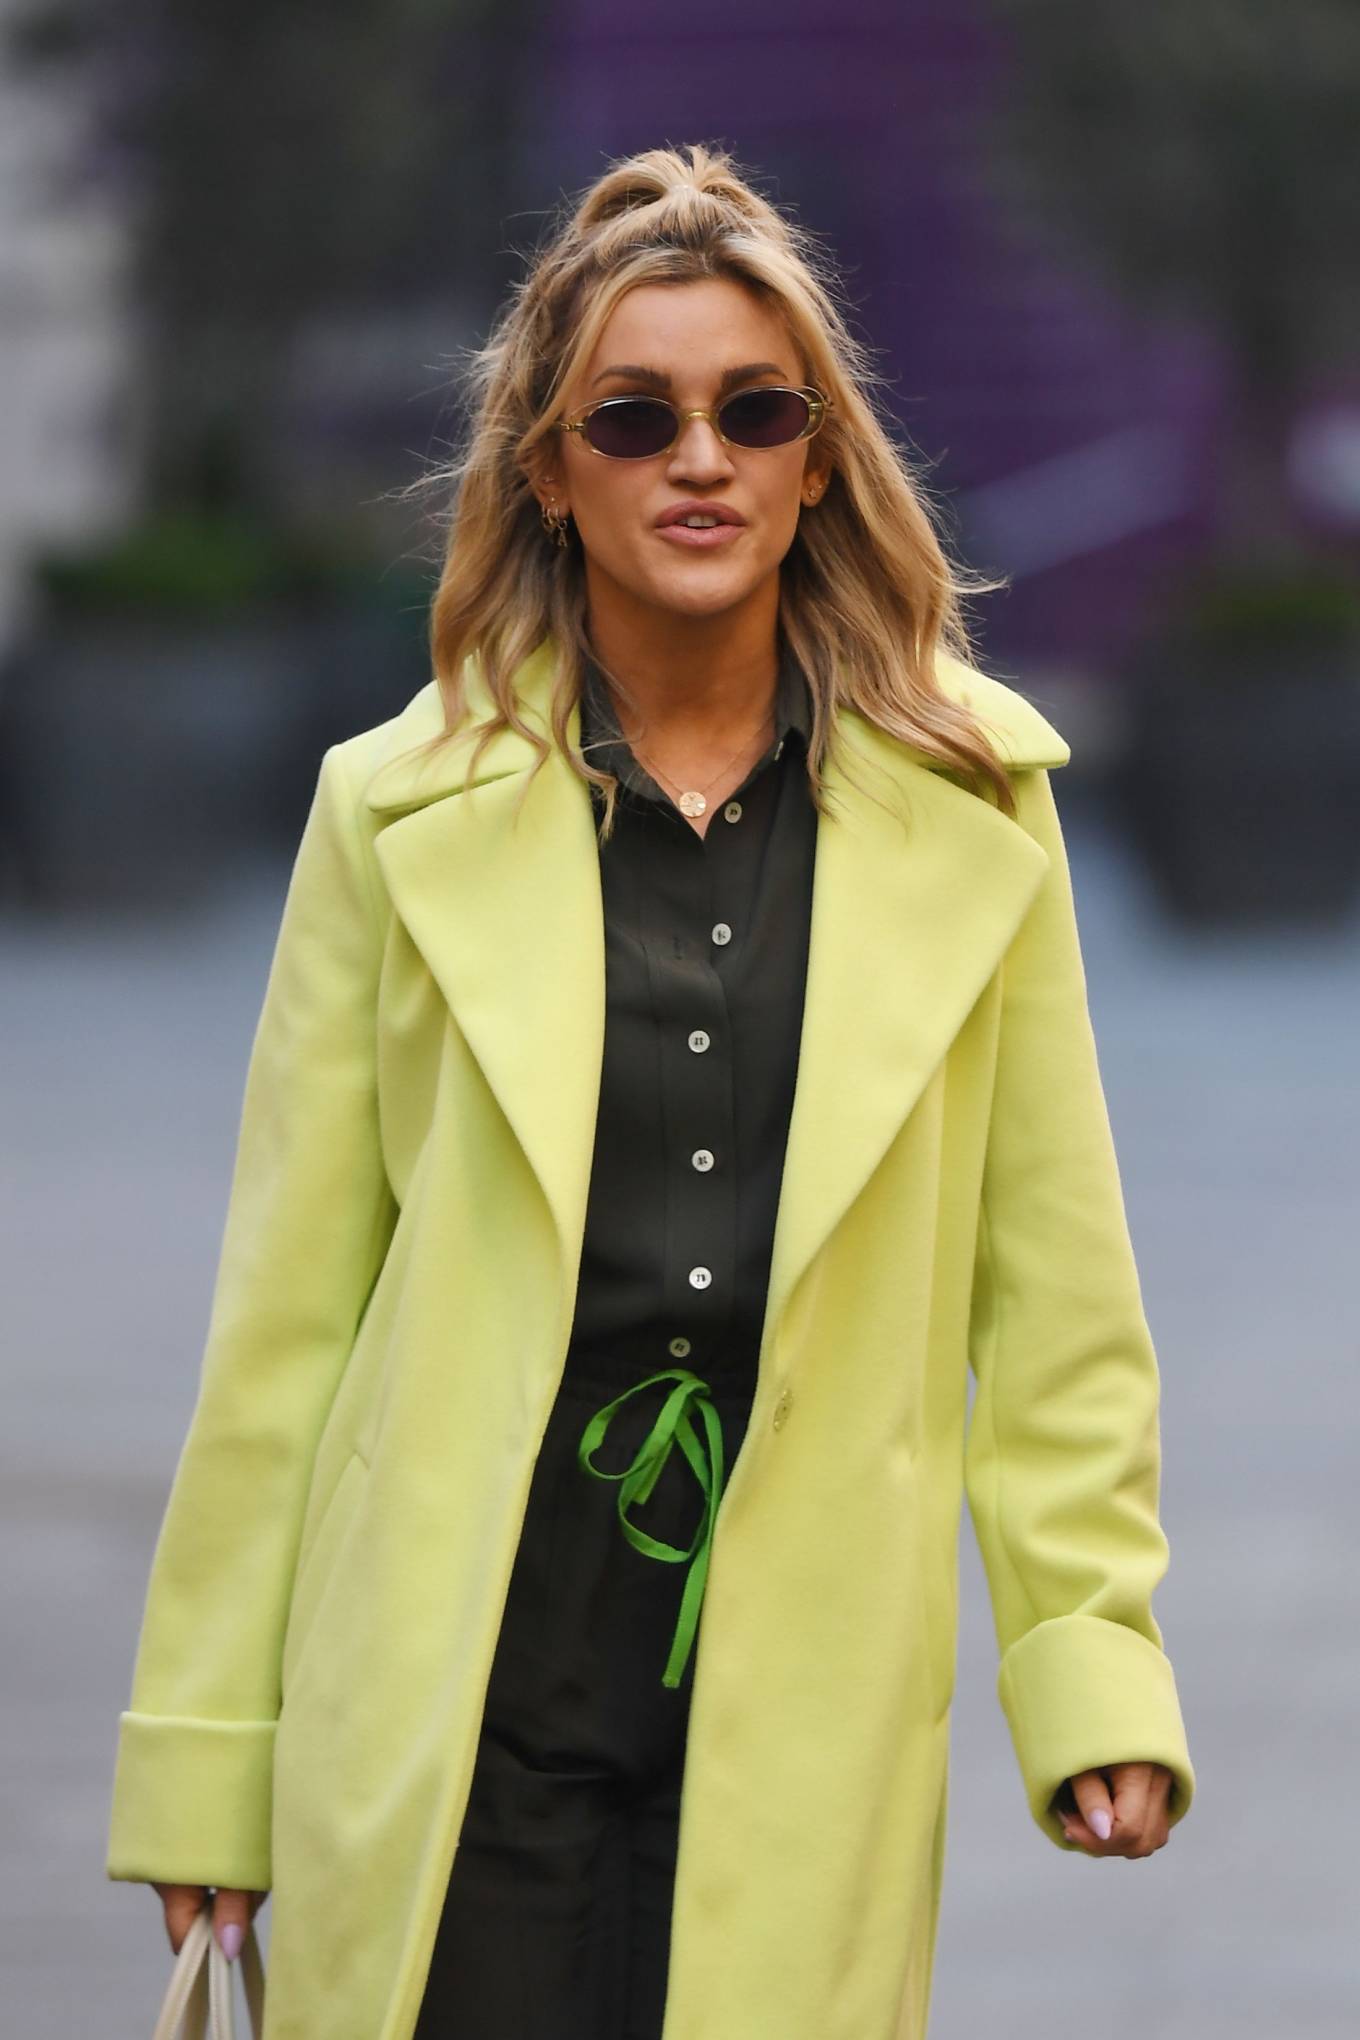 Ashley Roberts 2021 : Ashley Roberts – In a lime green trench coat at Heart radio in London-21